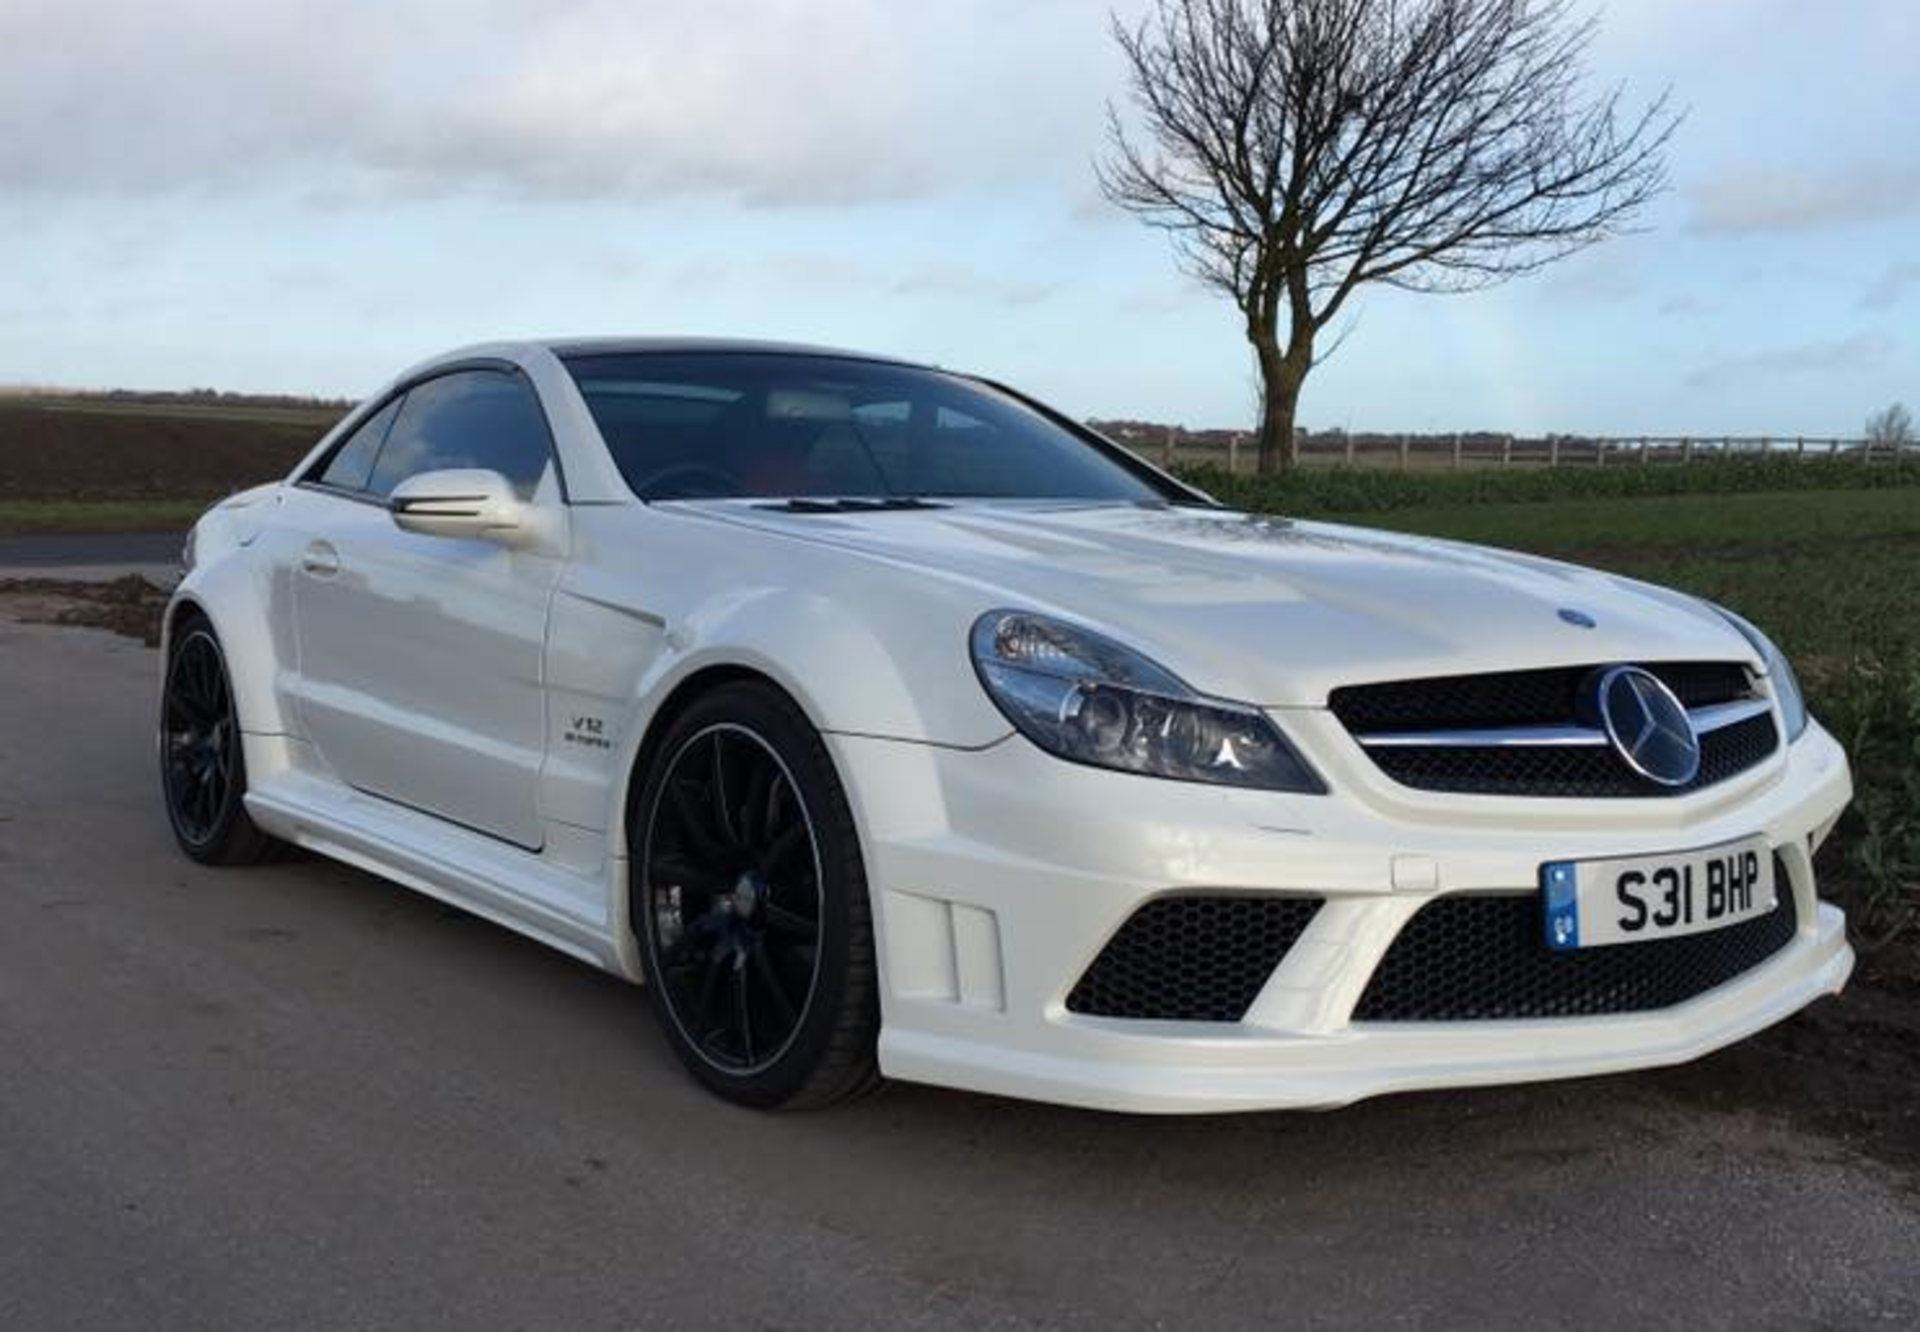 2002 Mercedes SL55 AMG - Private Registration 'S31 BHP' Included ***Reserve Lowered*** - Bild 3 aus 9